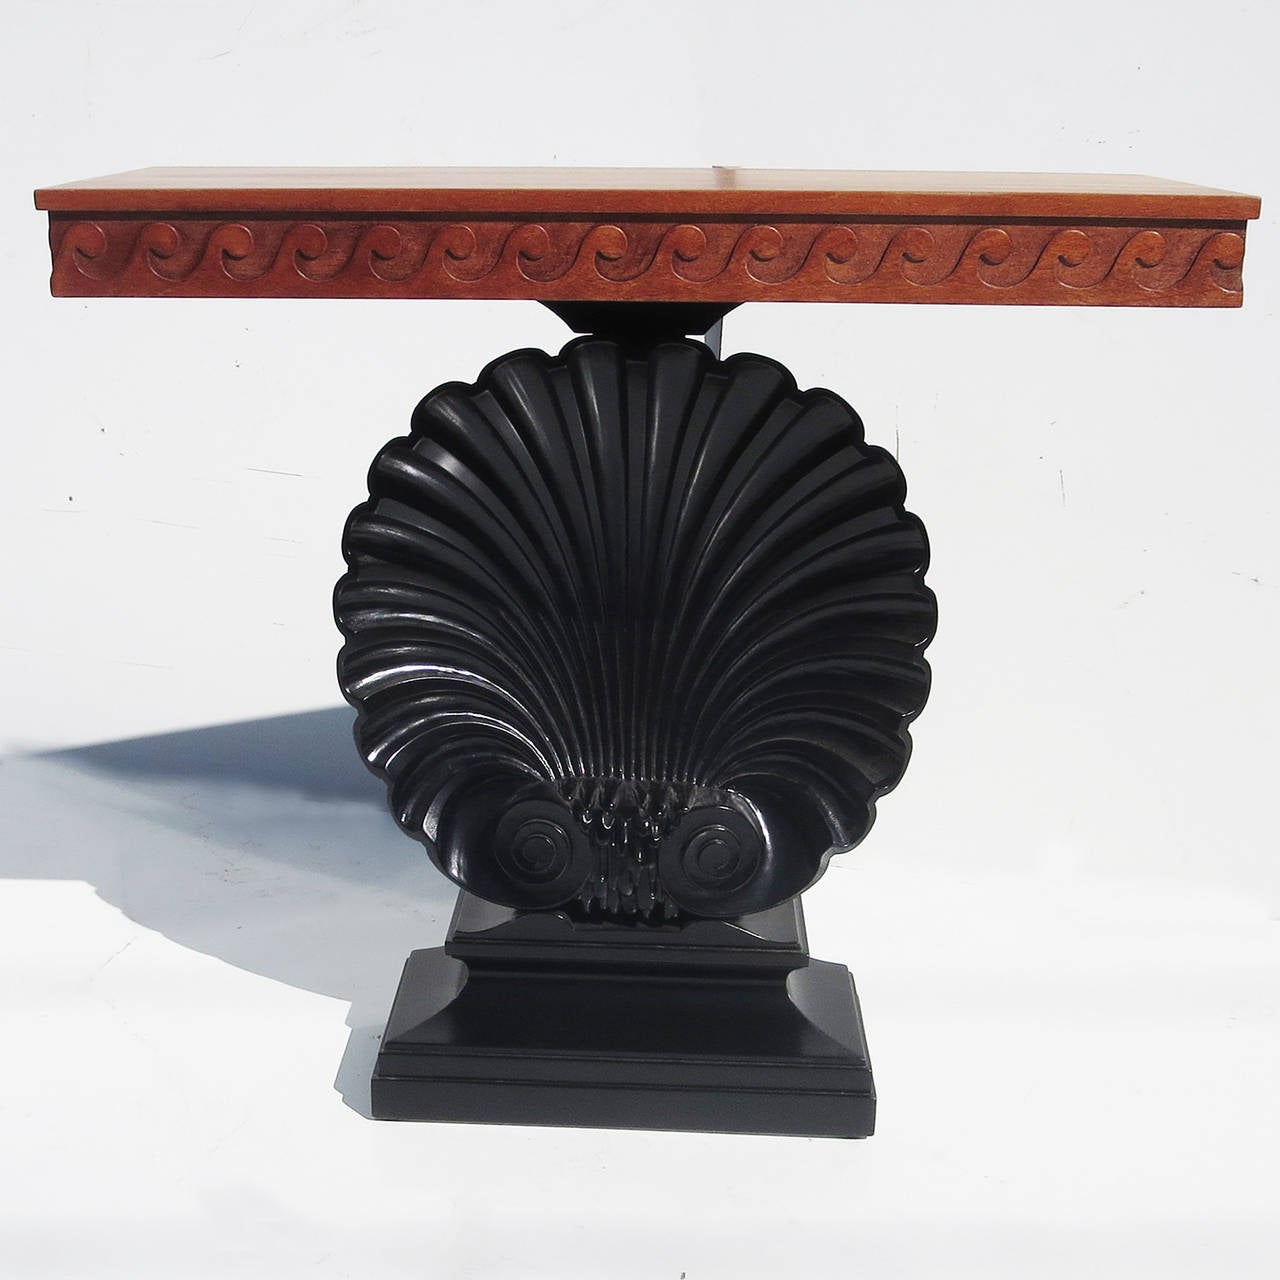 RETIREMENT SALE!!!  EVERYTHING MUST GO - CHECK OUT OUR OTHER ITEMS.				

A beautiful and classic design by Edward Wormley. The solid mahogany console features a hand carved shell form base, and a repeating carved wave pattern to the table edge. The